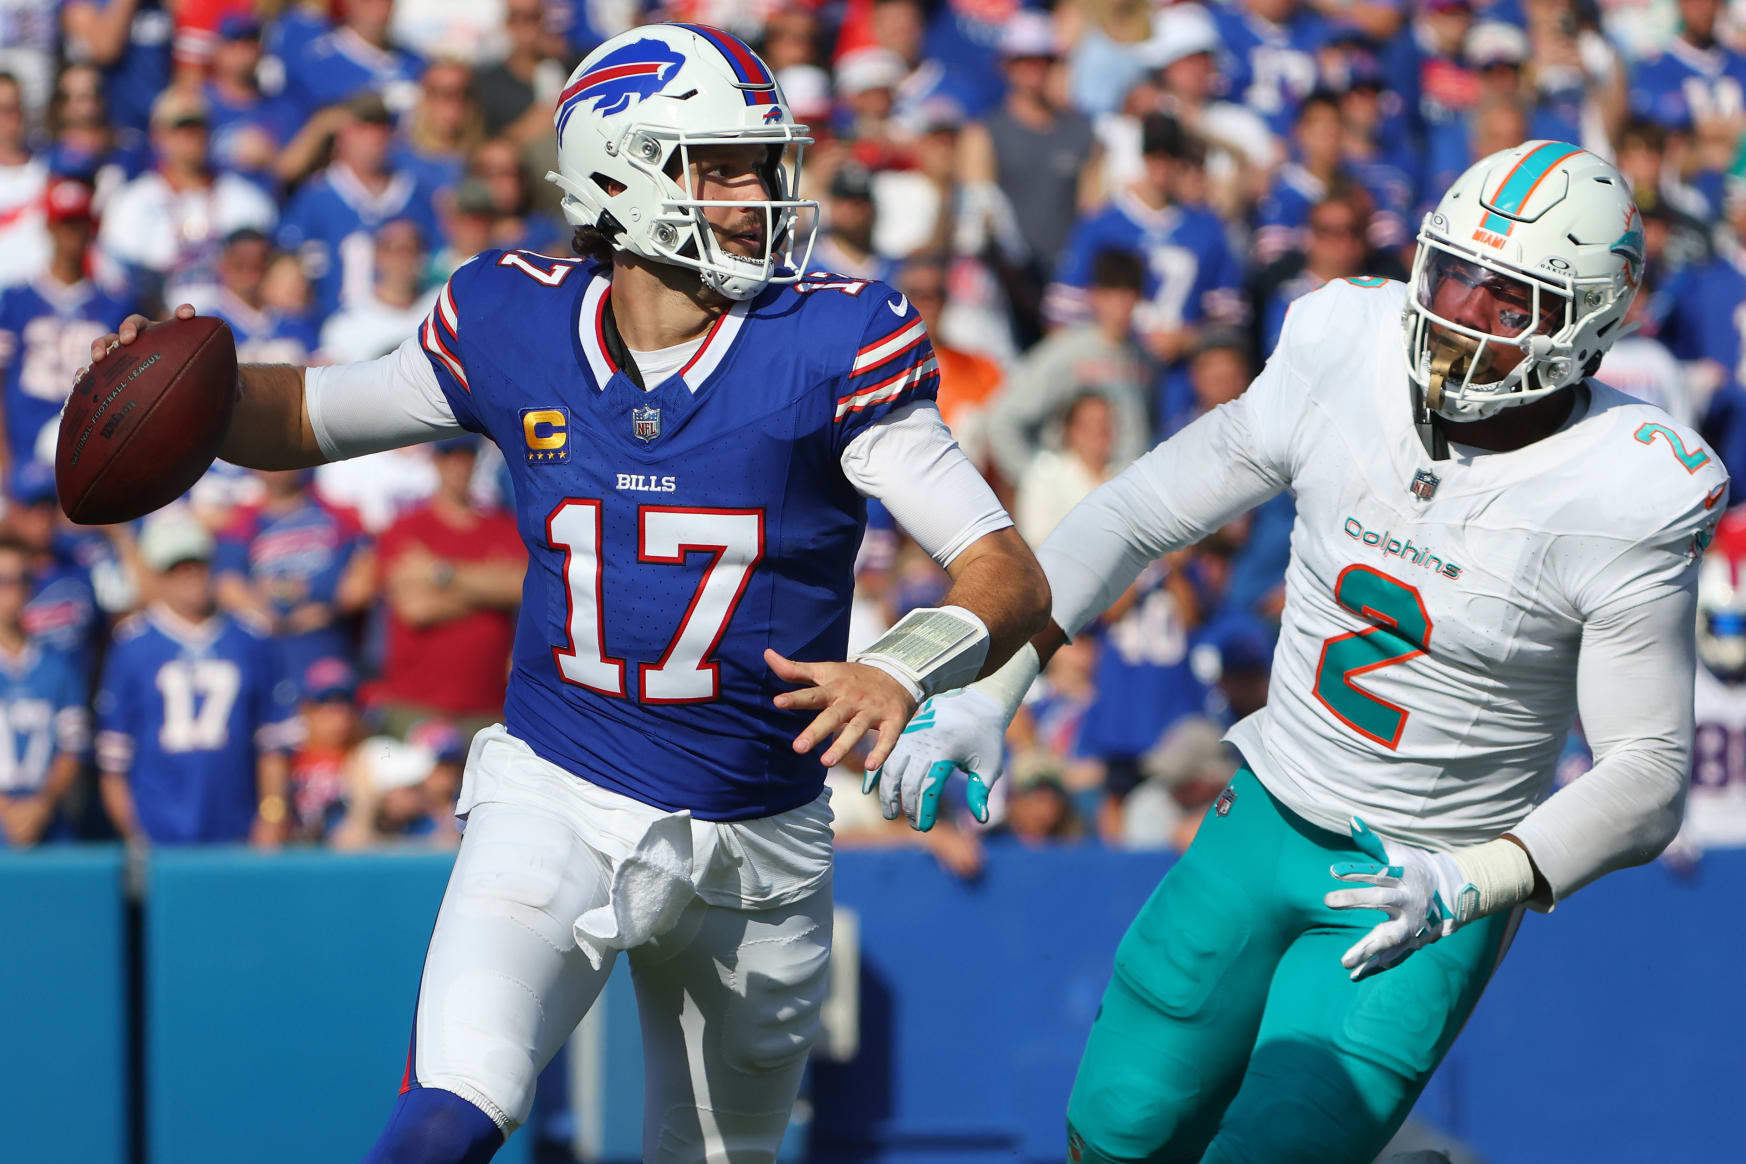 Bills Remind Dolphins Who Runs East, Wilson and Fields Fumble Away Wins,  49ers and Eagles 4-0 